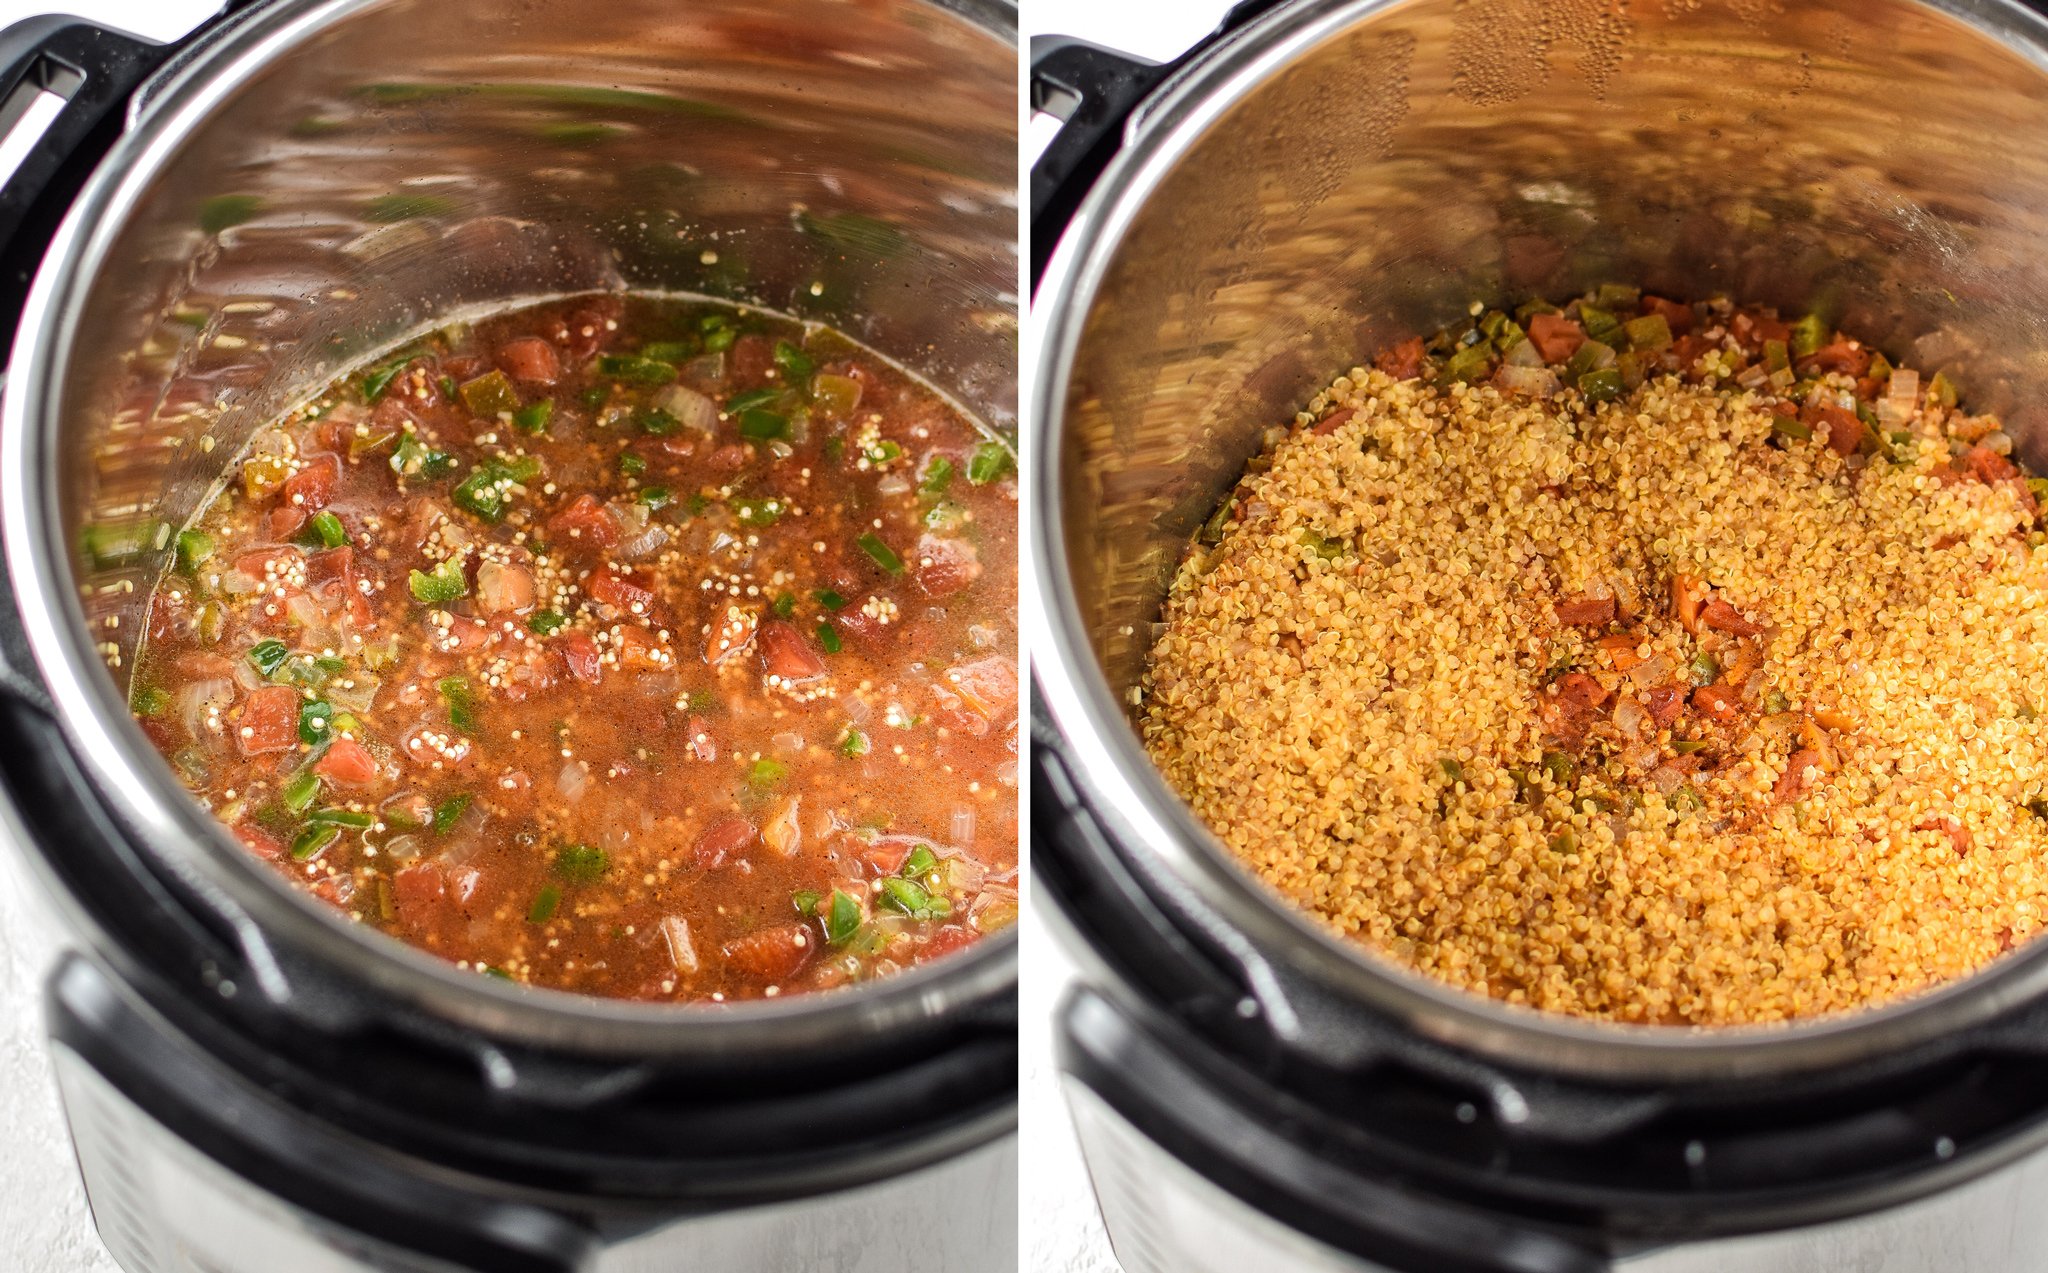 Before cooking and after cooking quinoa in the IP.